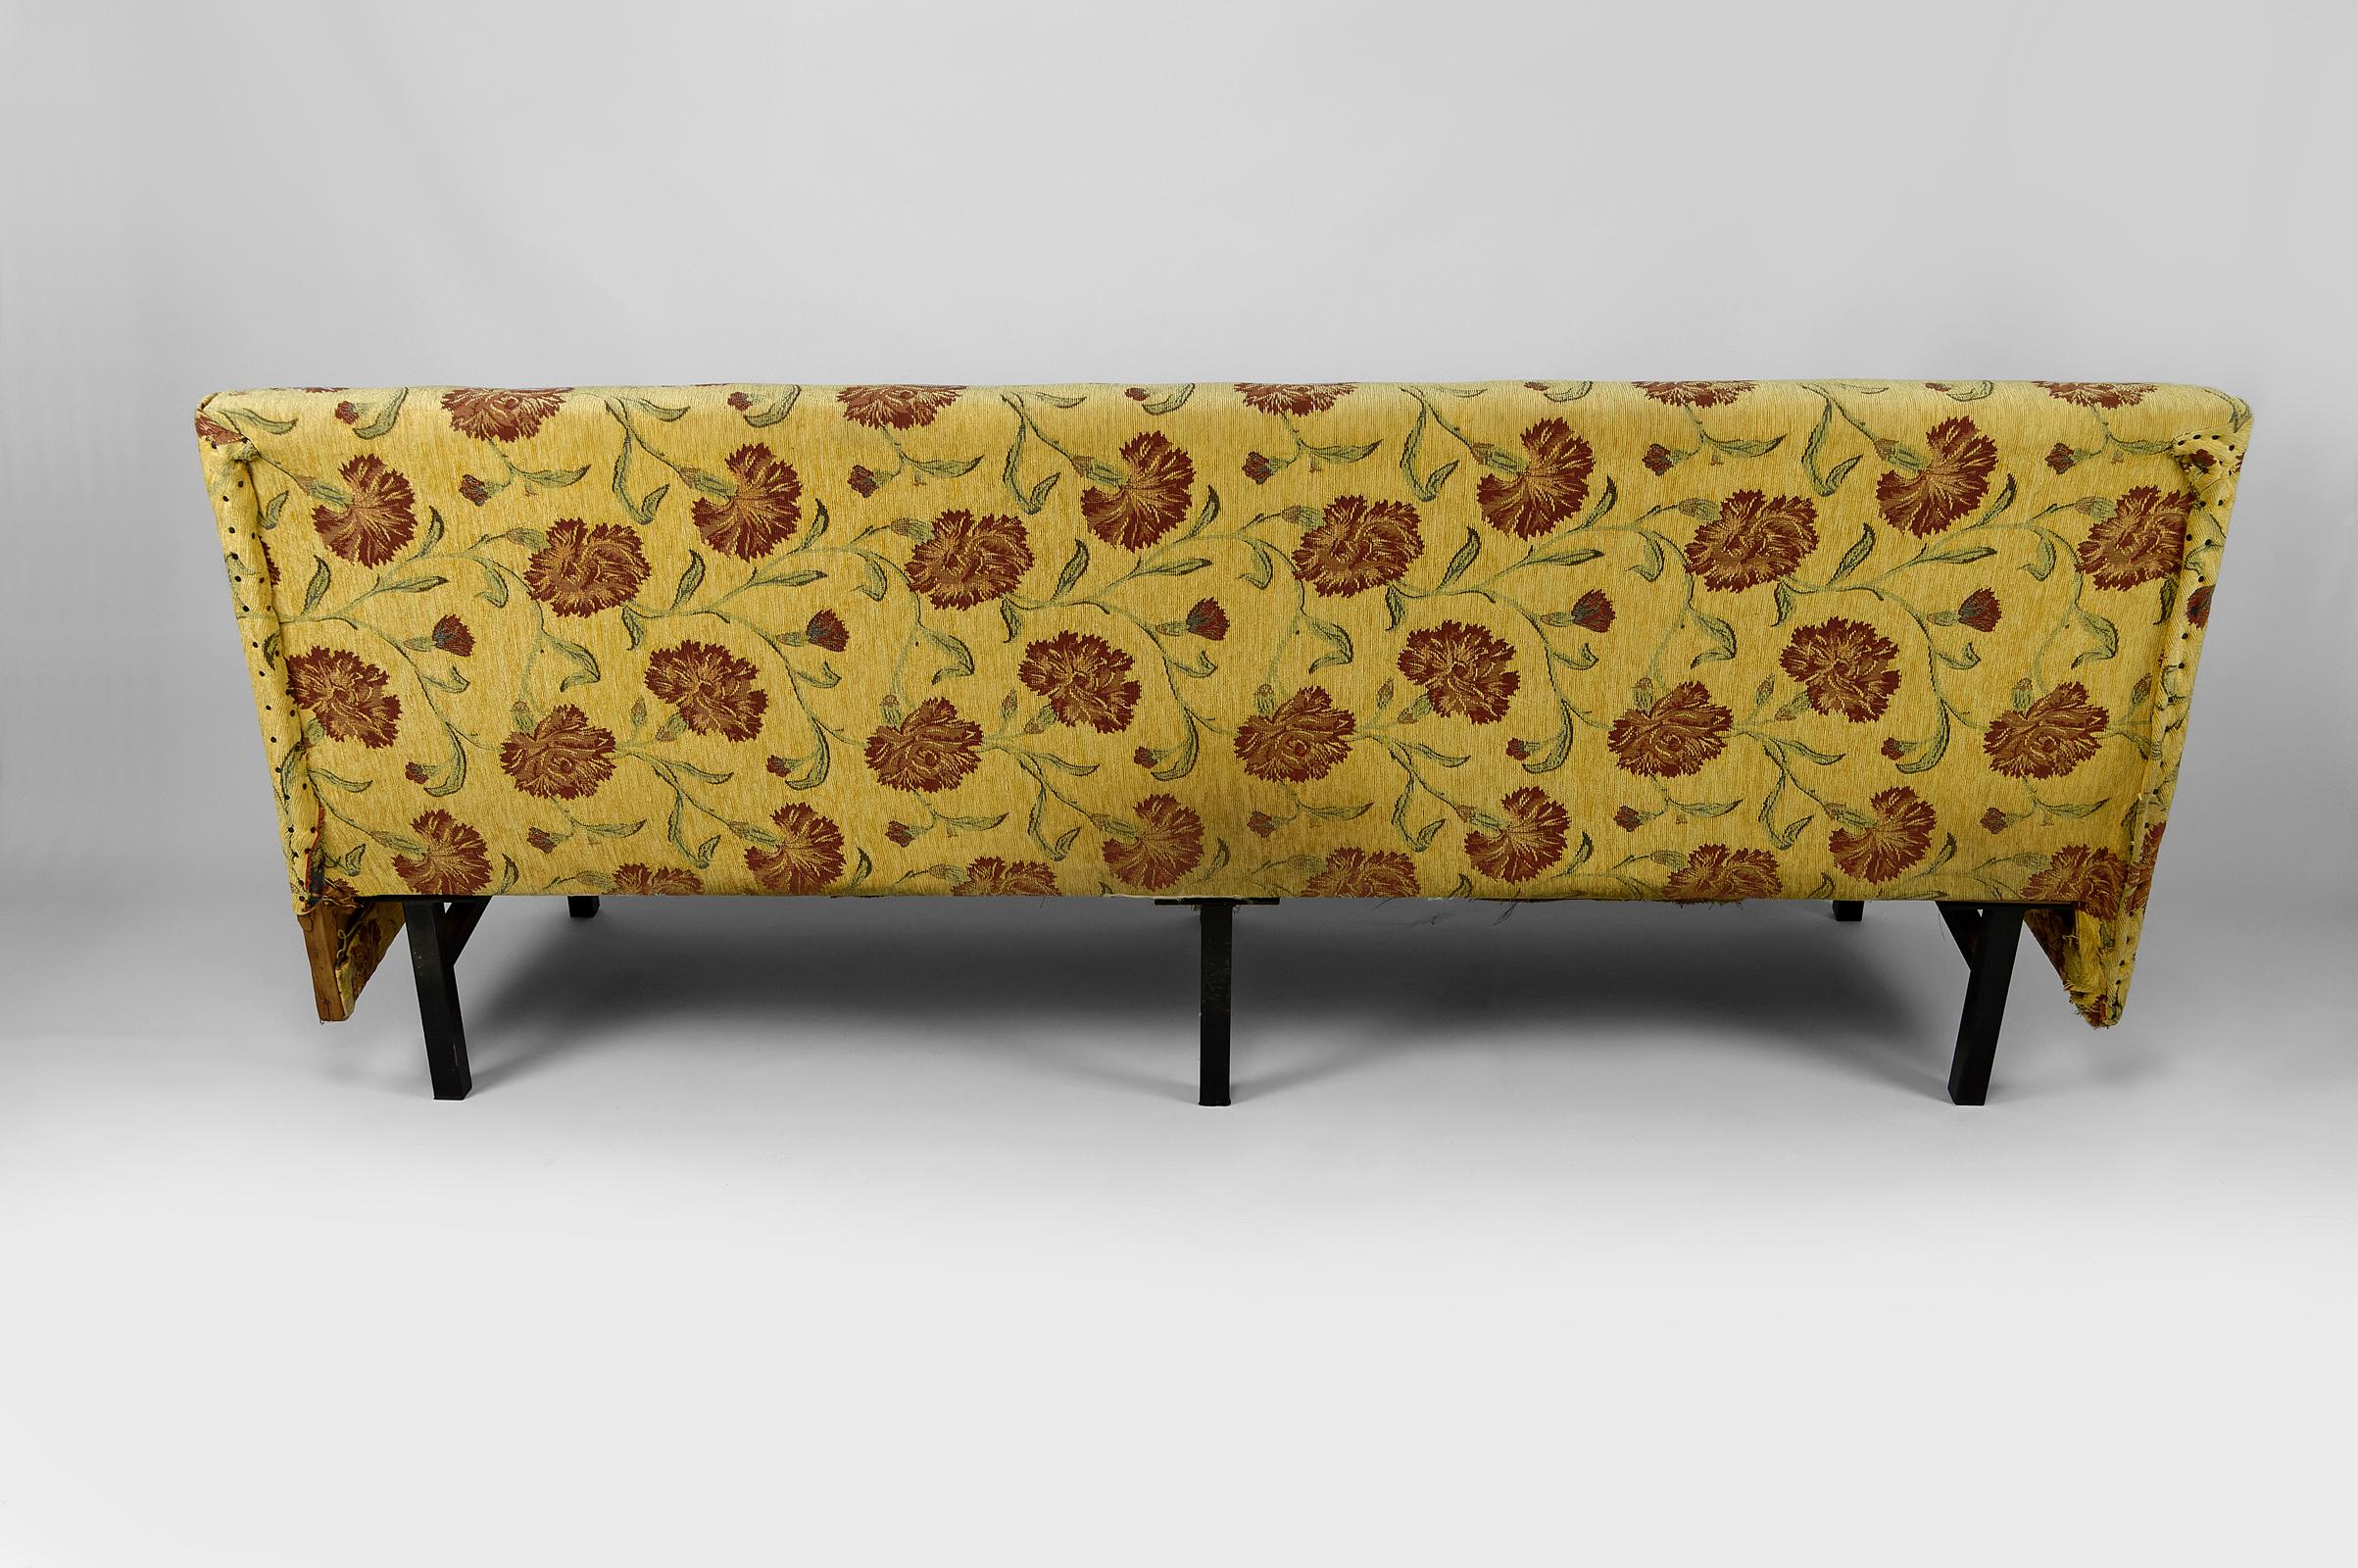 Vintage Boho sofa with yellow and red floral fabric, France, Circa 1960 For Sale 4